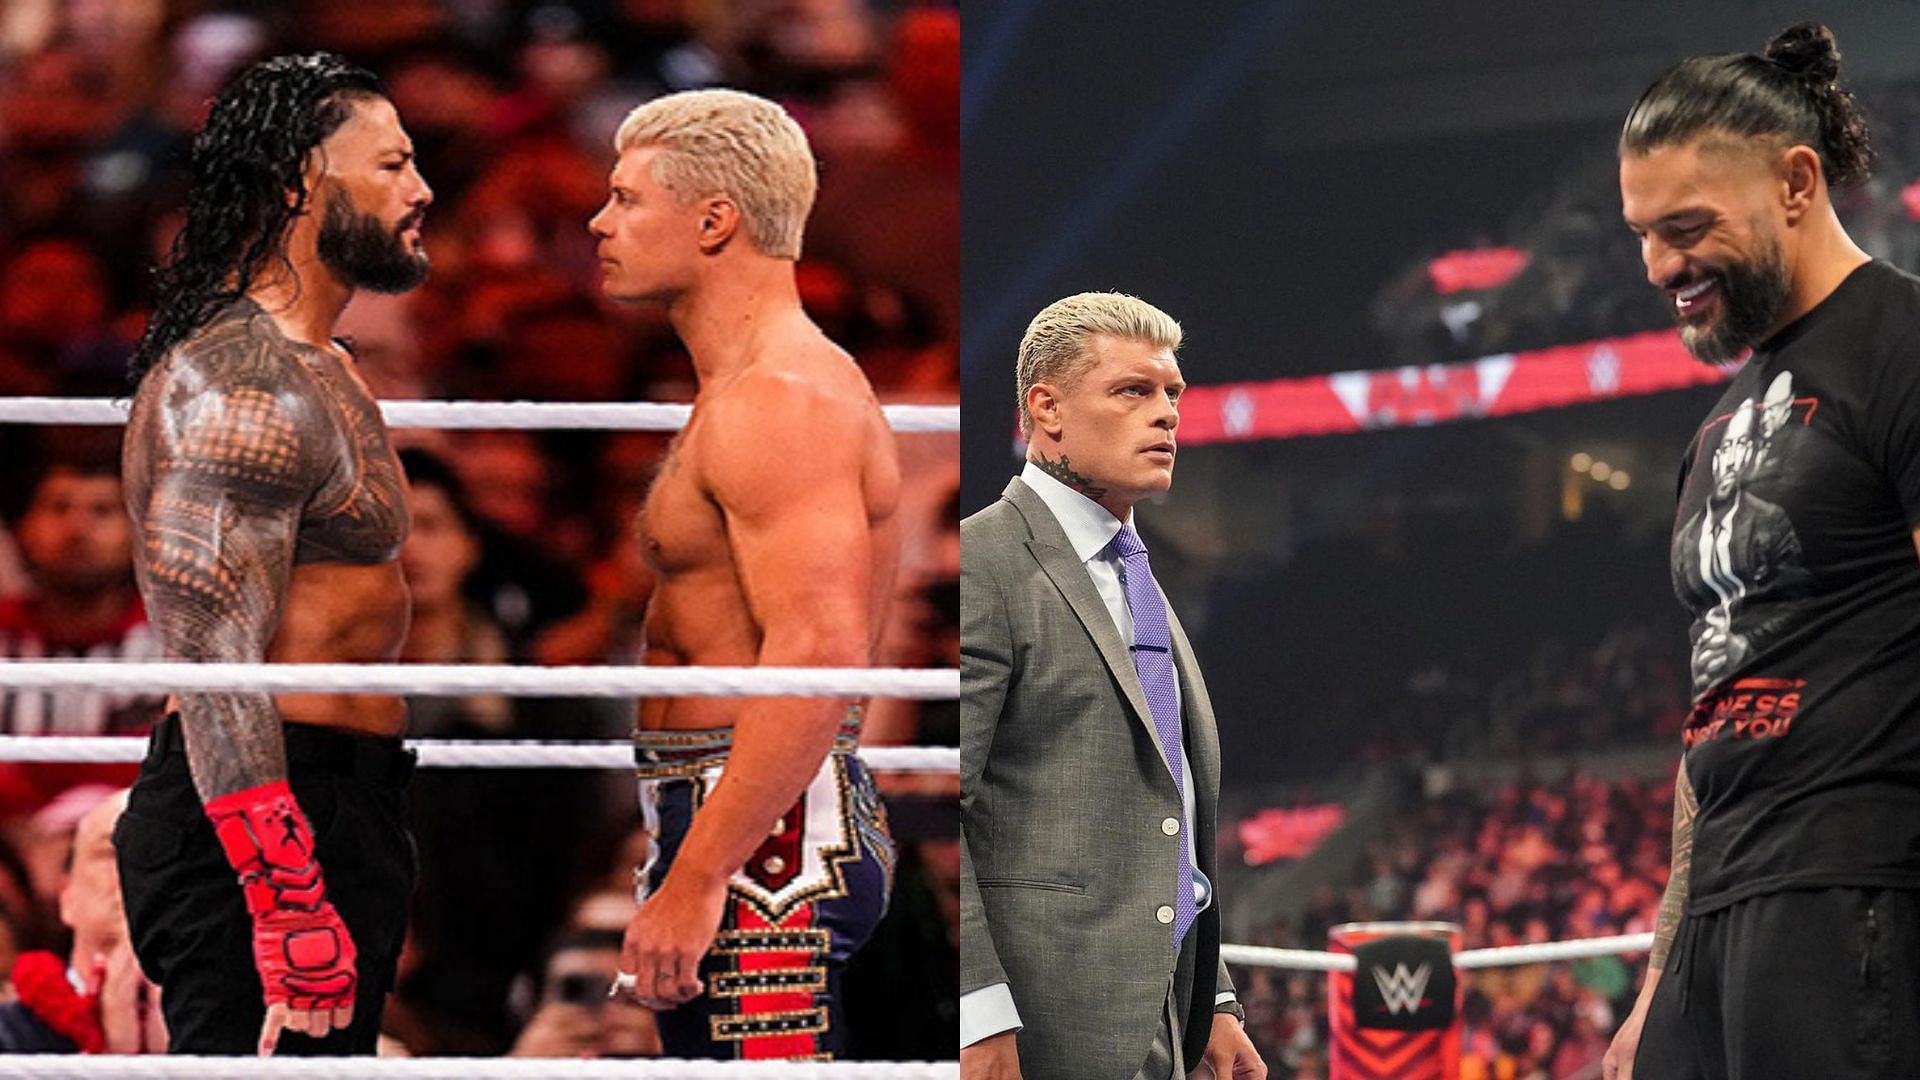 Cody Rhodes and Roman Reigns will be on SmackDown